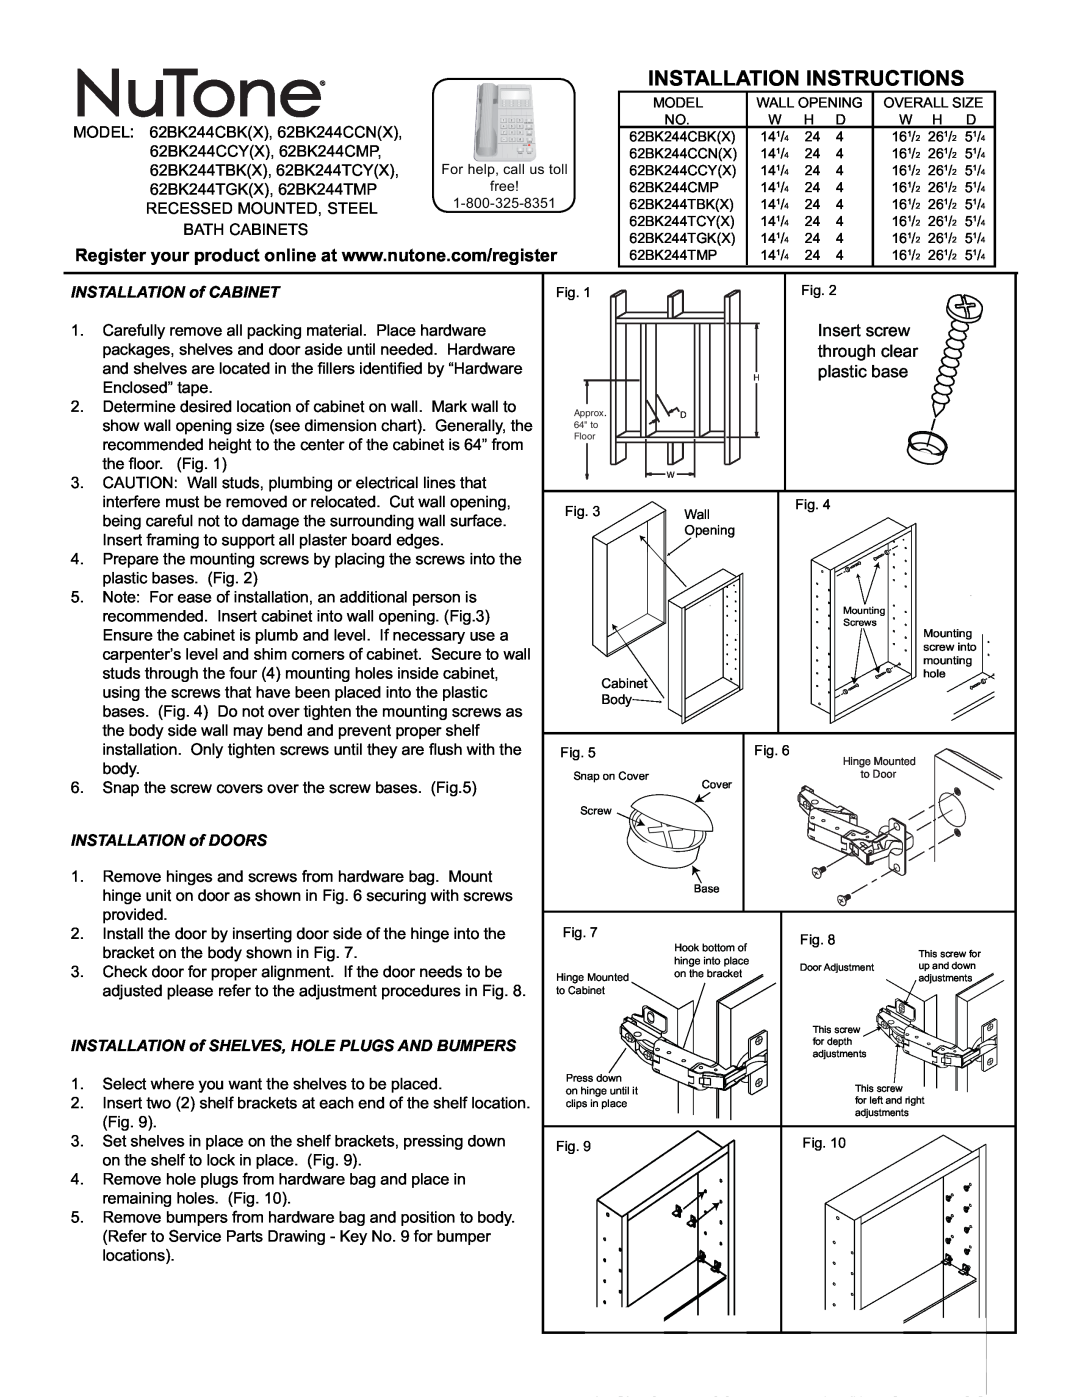 NuTone 62BK244CCN(X) installation instructions Installation, INSTALLATION of DOORS, Instructions, Register your 